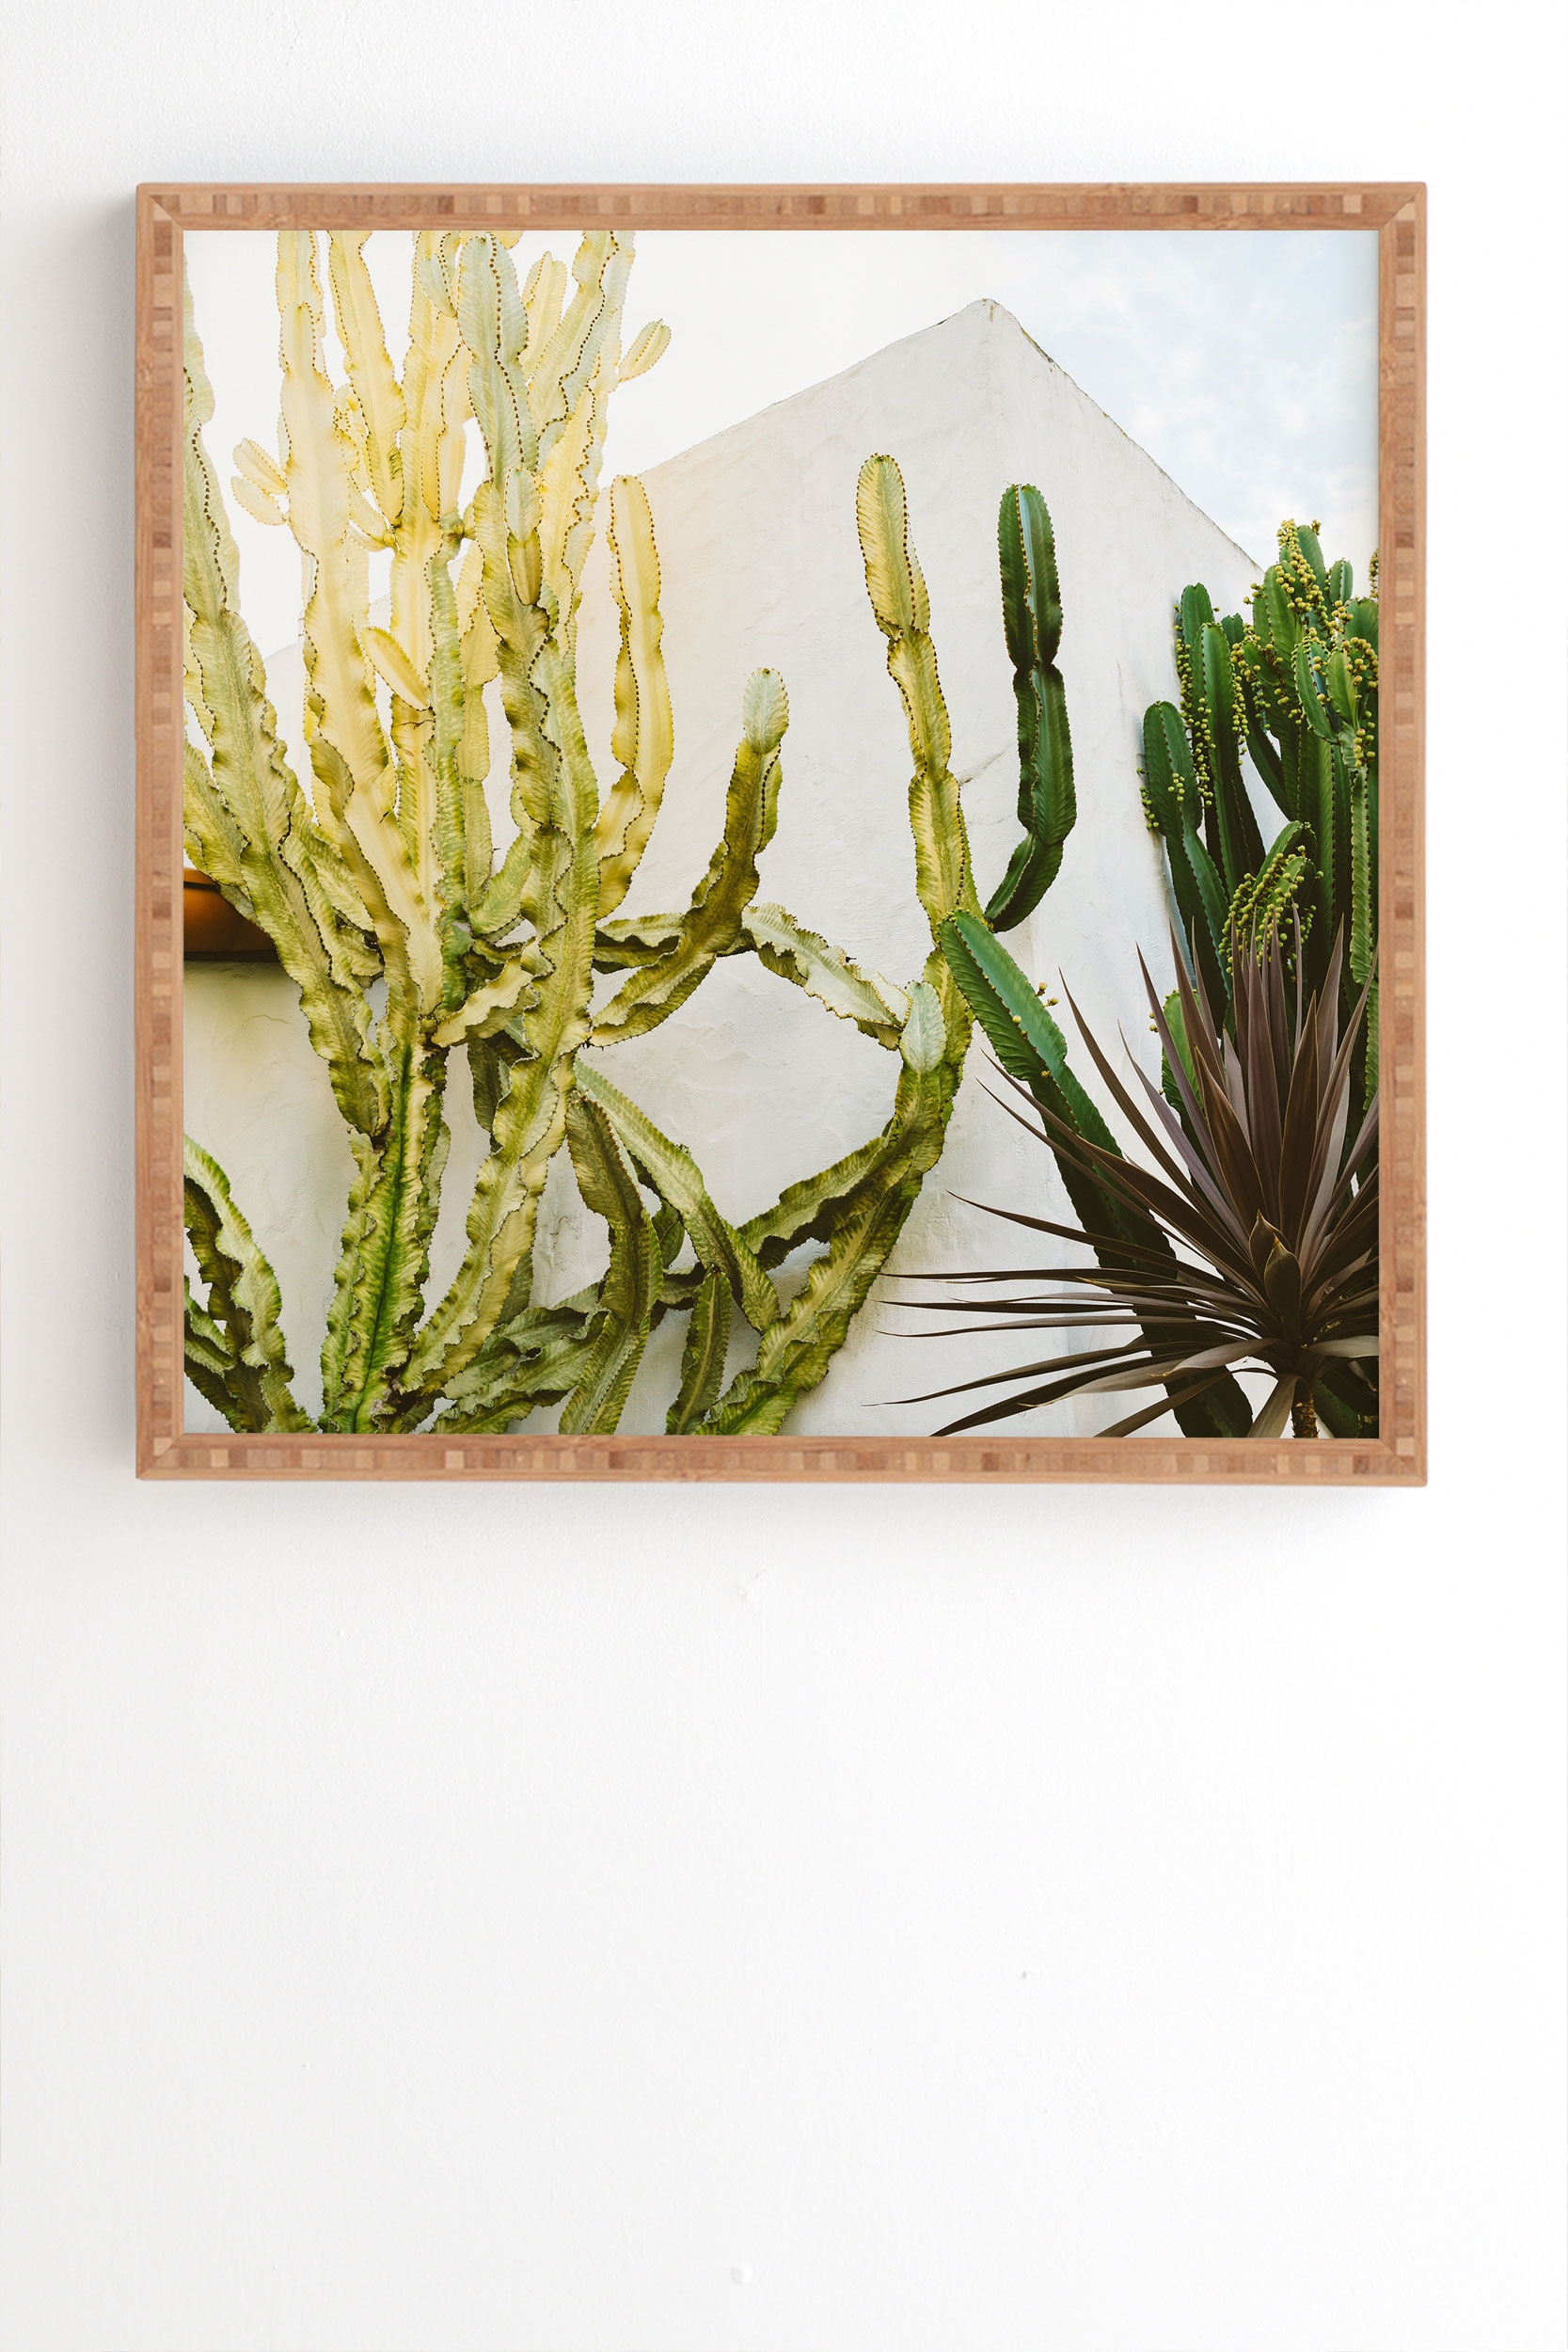 California Cactus Garden by Bethany Young Photography - Framed Wall Art Bamboo 12" x 12" - Image 1